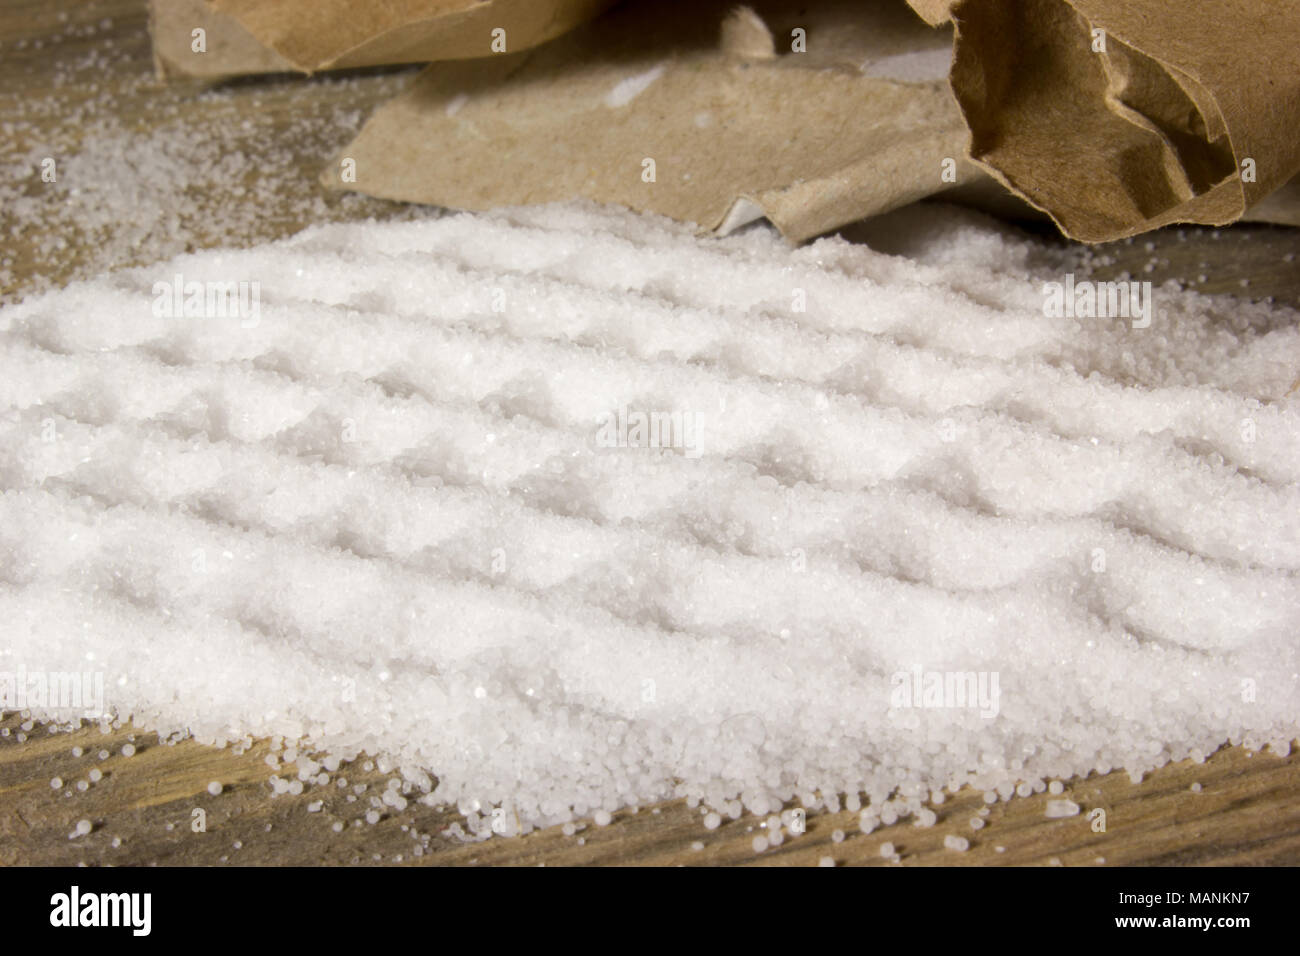 Small table Salt in Kraft box spilled on the wooden background Stock Photo